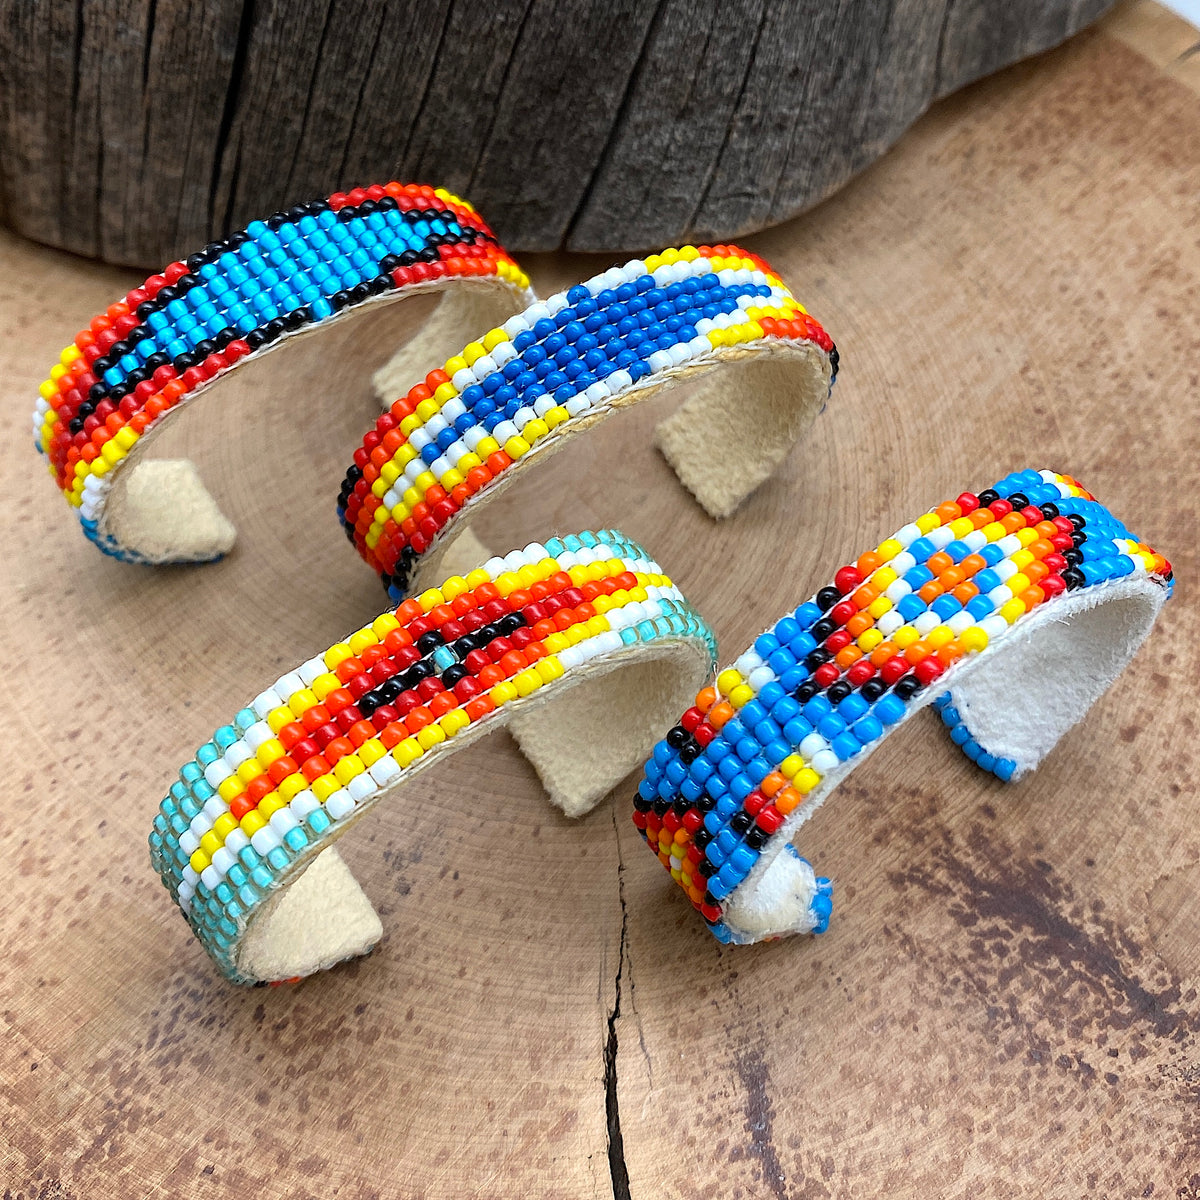 Beaded baby bracelets of various patterns and colors laid together